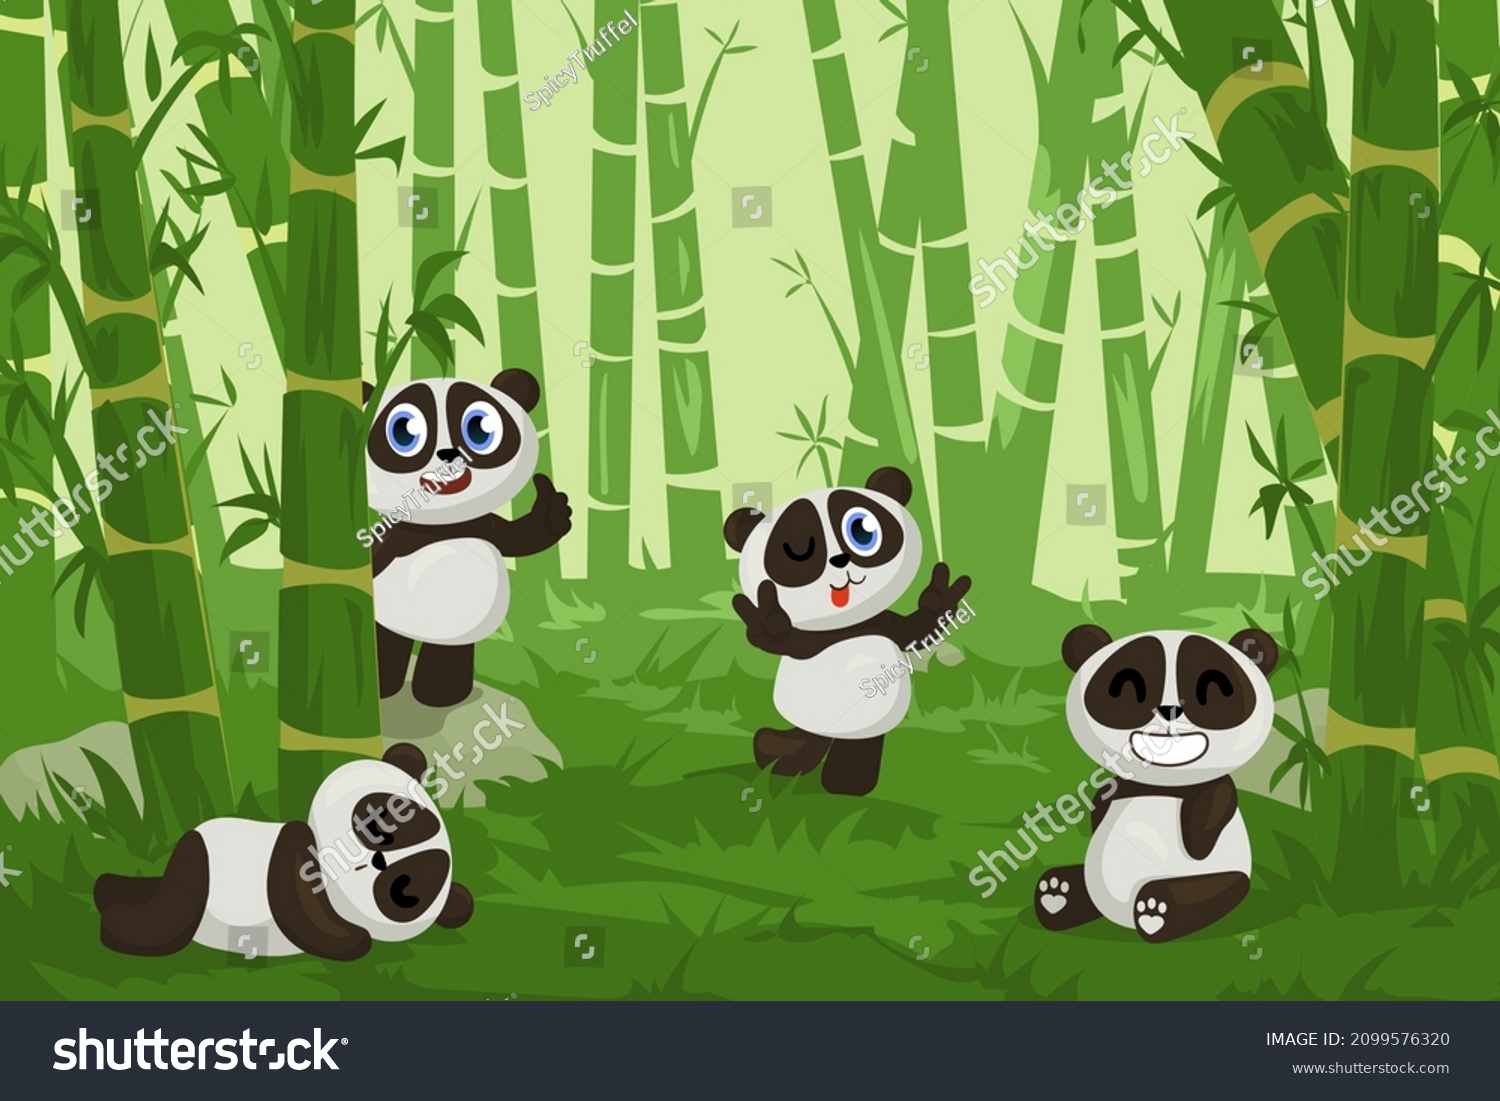 SVG of Panda in bamboo garden. Cartoon happy zoo bear character in green forest. Funny Chinese animal mascot with cute emotion expressions. Asian creature sleeping in woodland. Vector background svg